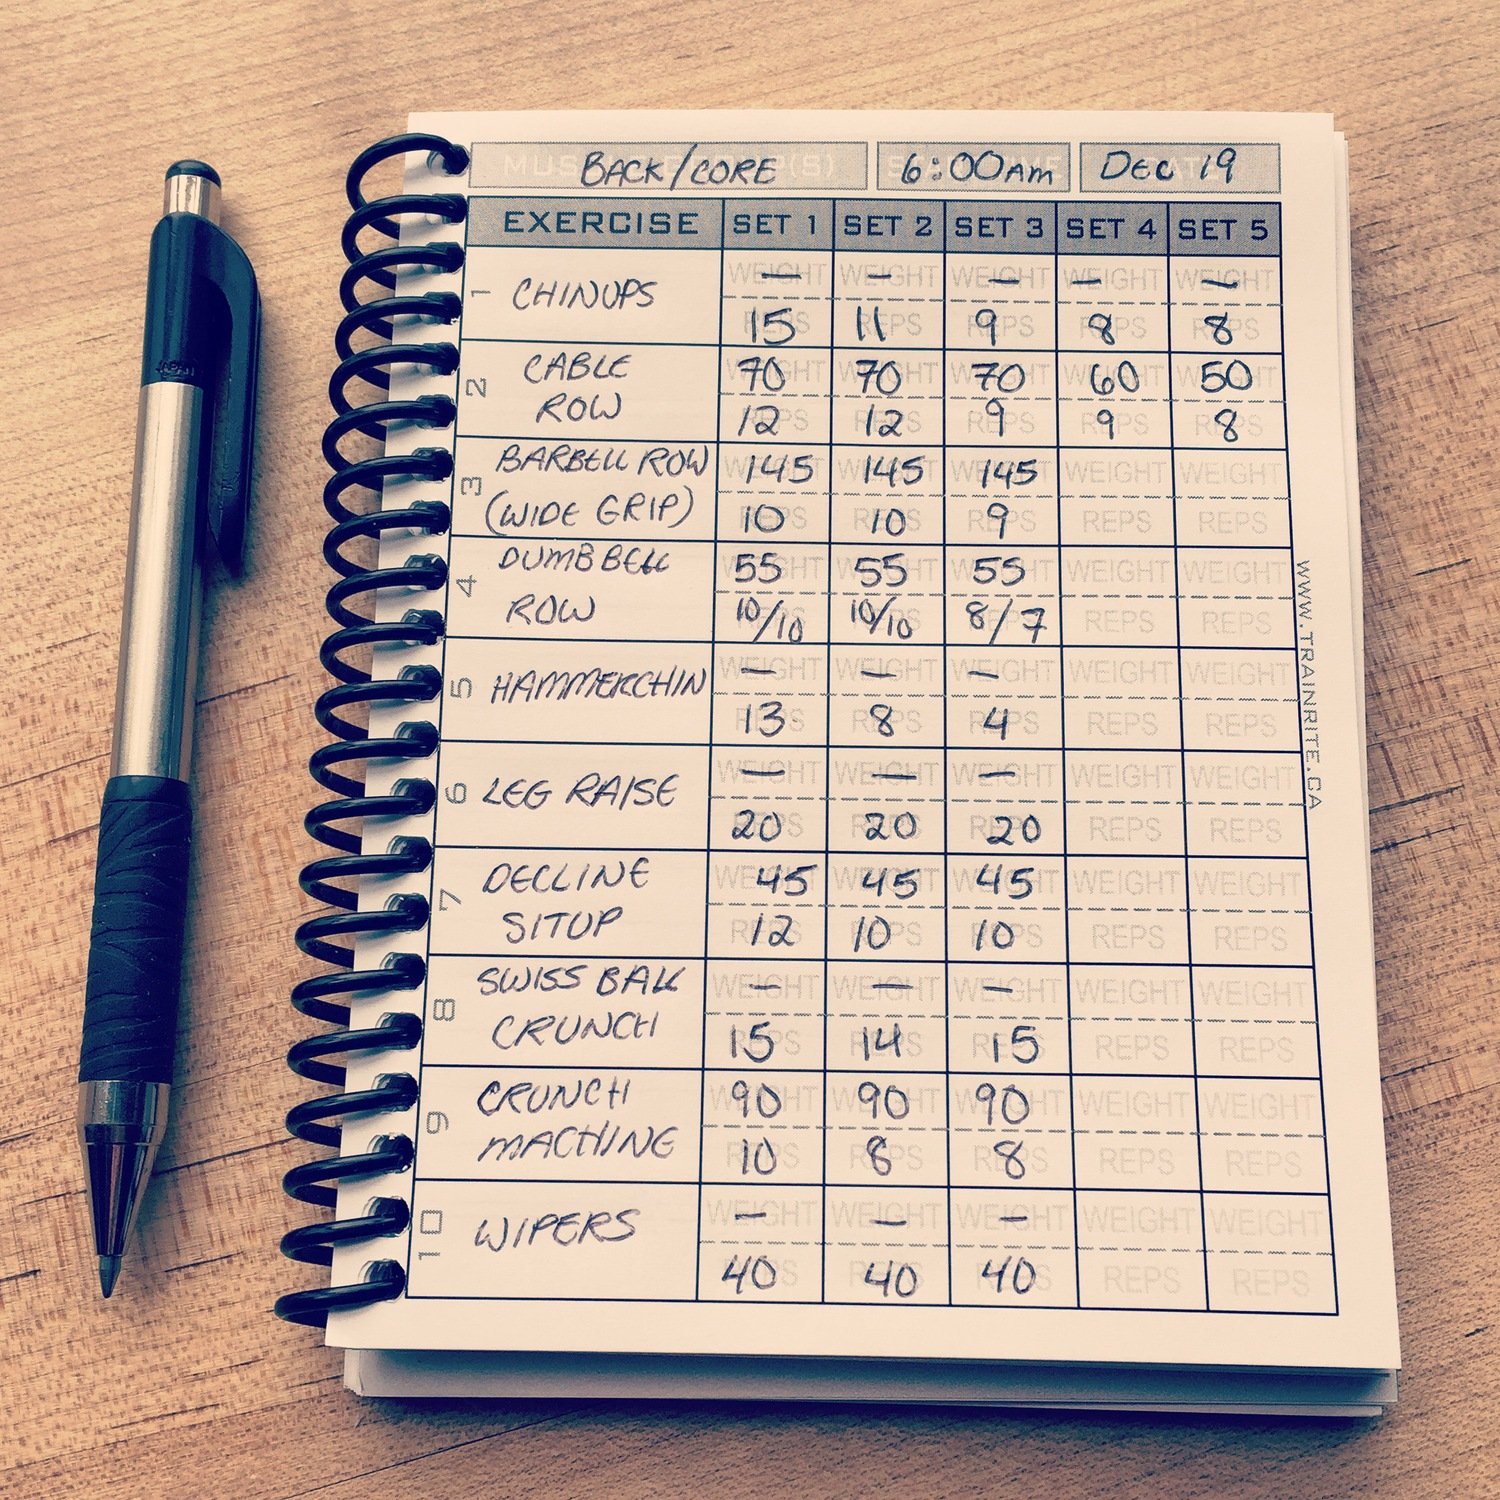 TrainRite Compact Fitness Journal - NO EXCUSES Black (An Exercise Log Book)